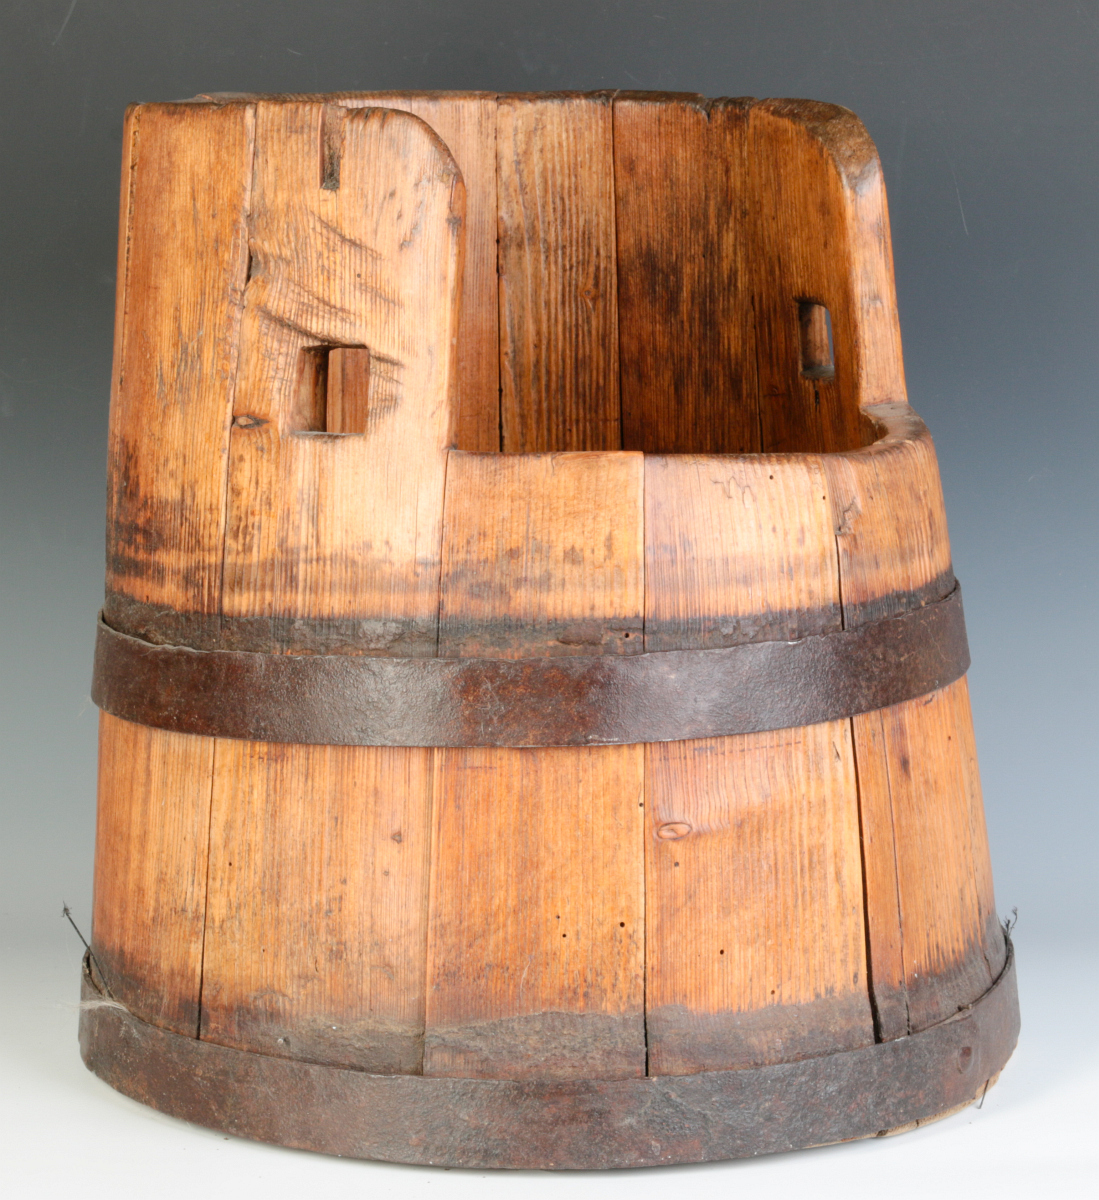 AN UNUSUAL 19TH CENTURY STAVE CONSTRUCTION BUCKET